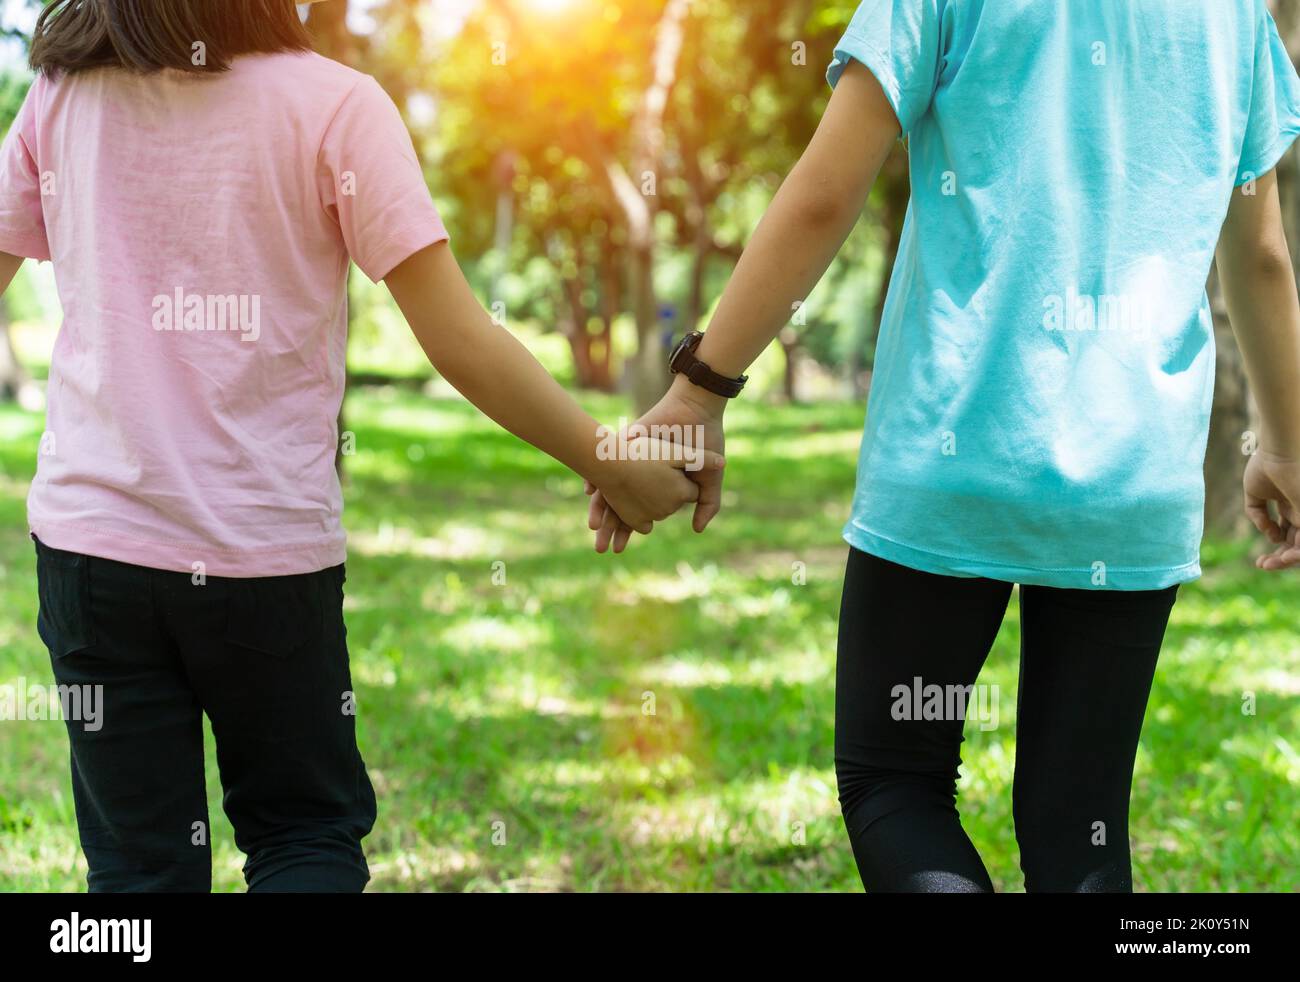 Two sister holding hands in the park in warm spring day. Happy friendship family concept. Stock Photo